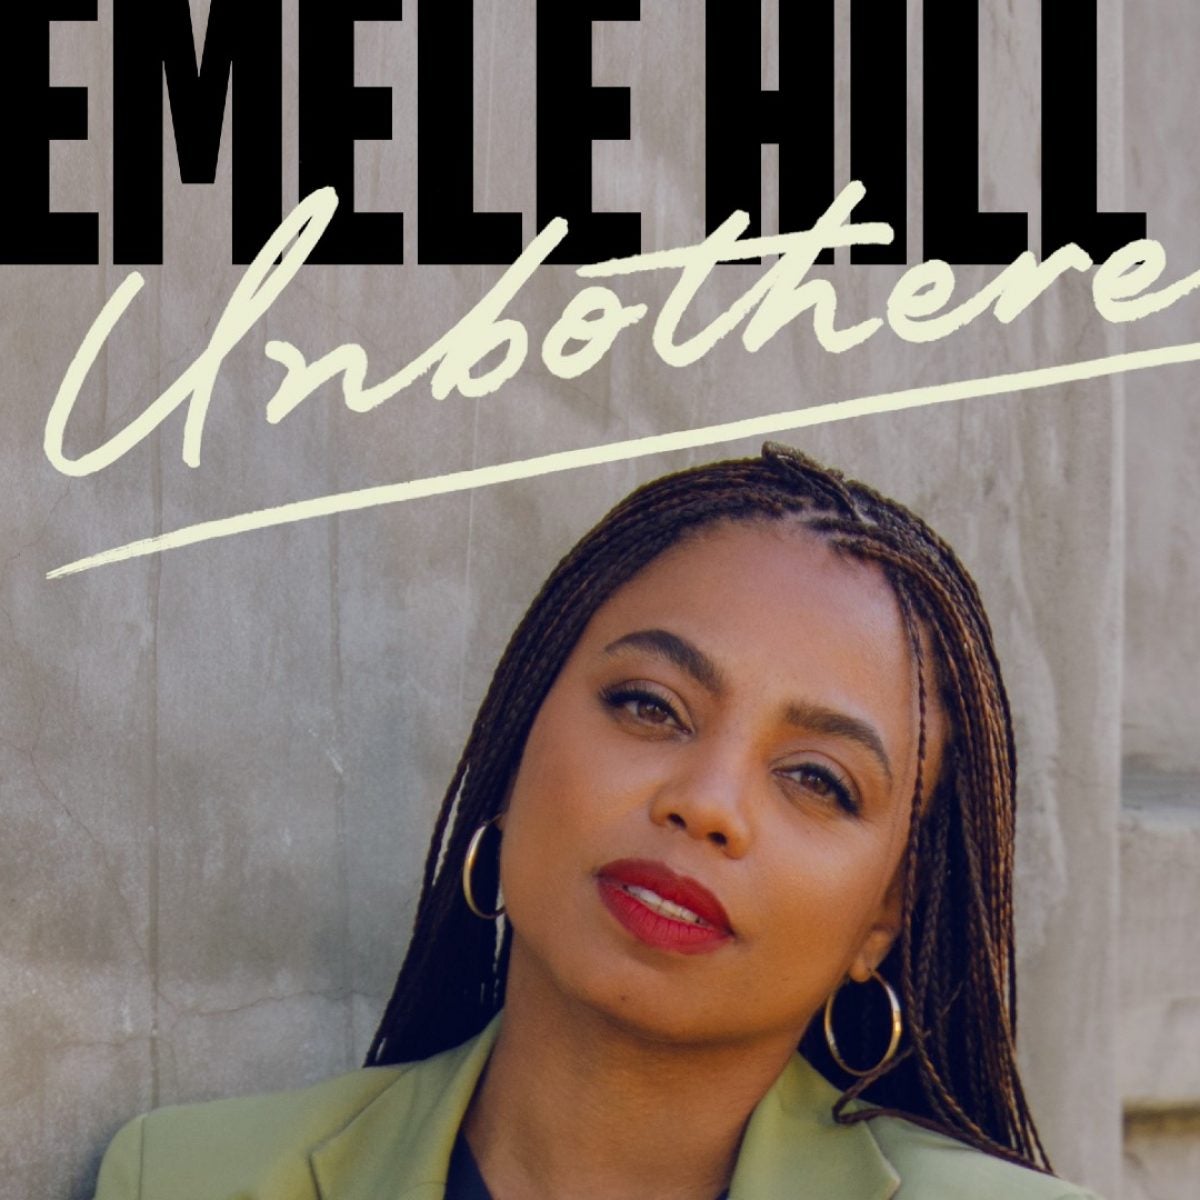 EXCLUSIVE: Jemele Hill Announces Mary J. Blige as First Guest on Her "Jemele Hill is Unbothered," Podcast, Now in its 3rd Season